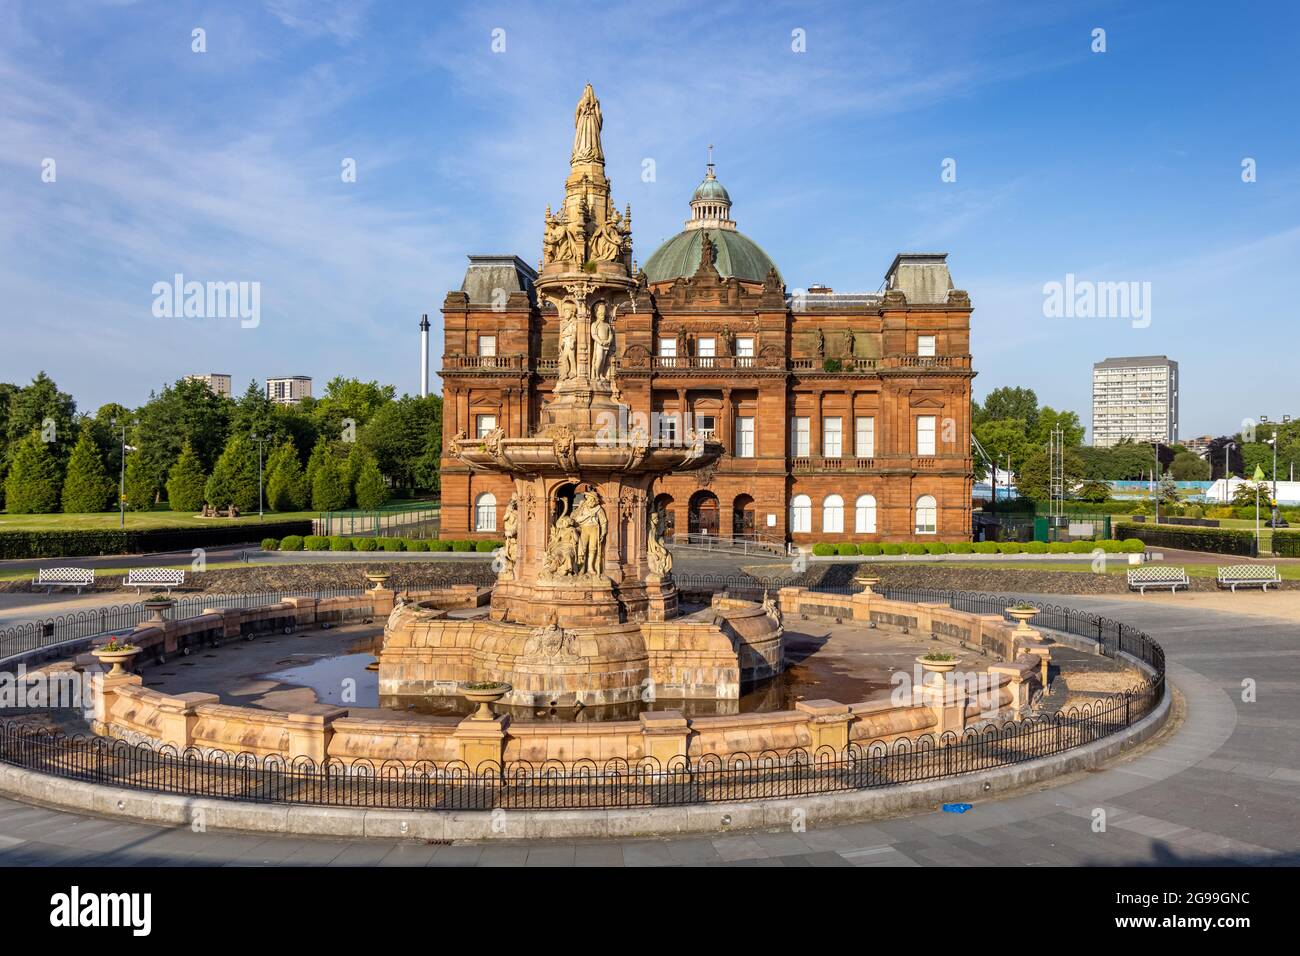 The Daulton Fountain outside the People’s Palace, a social history museum set in historic Glasgow Green in Scotland, Uk Stock Photo